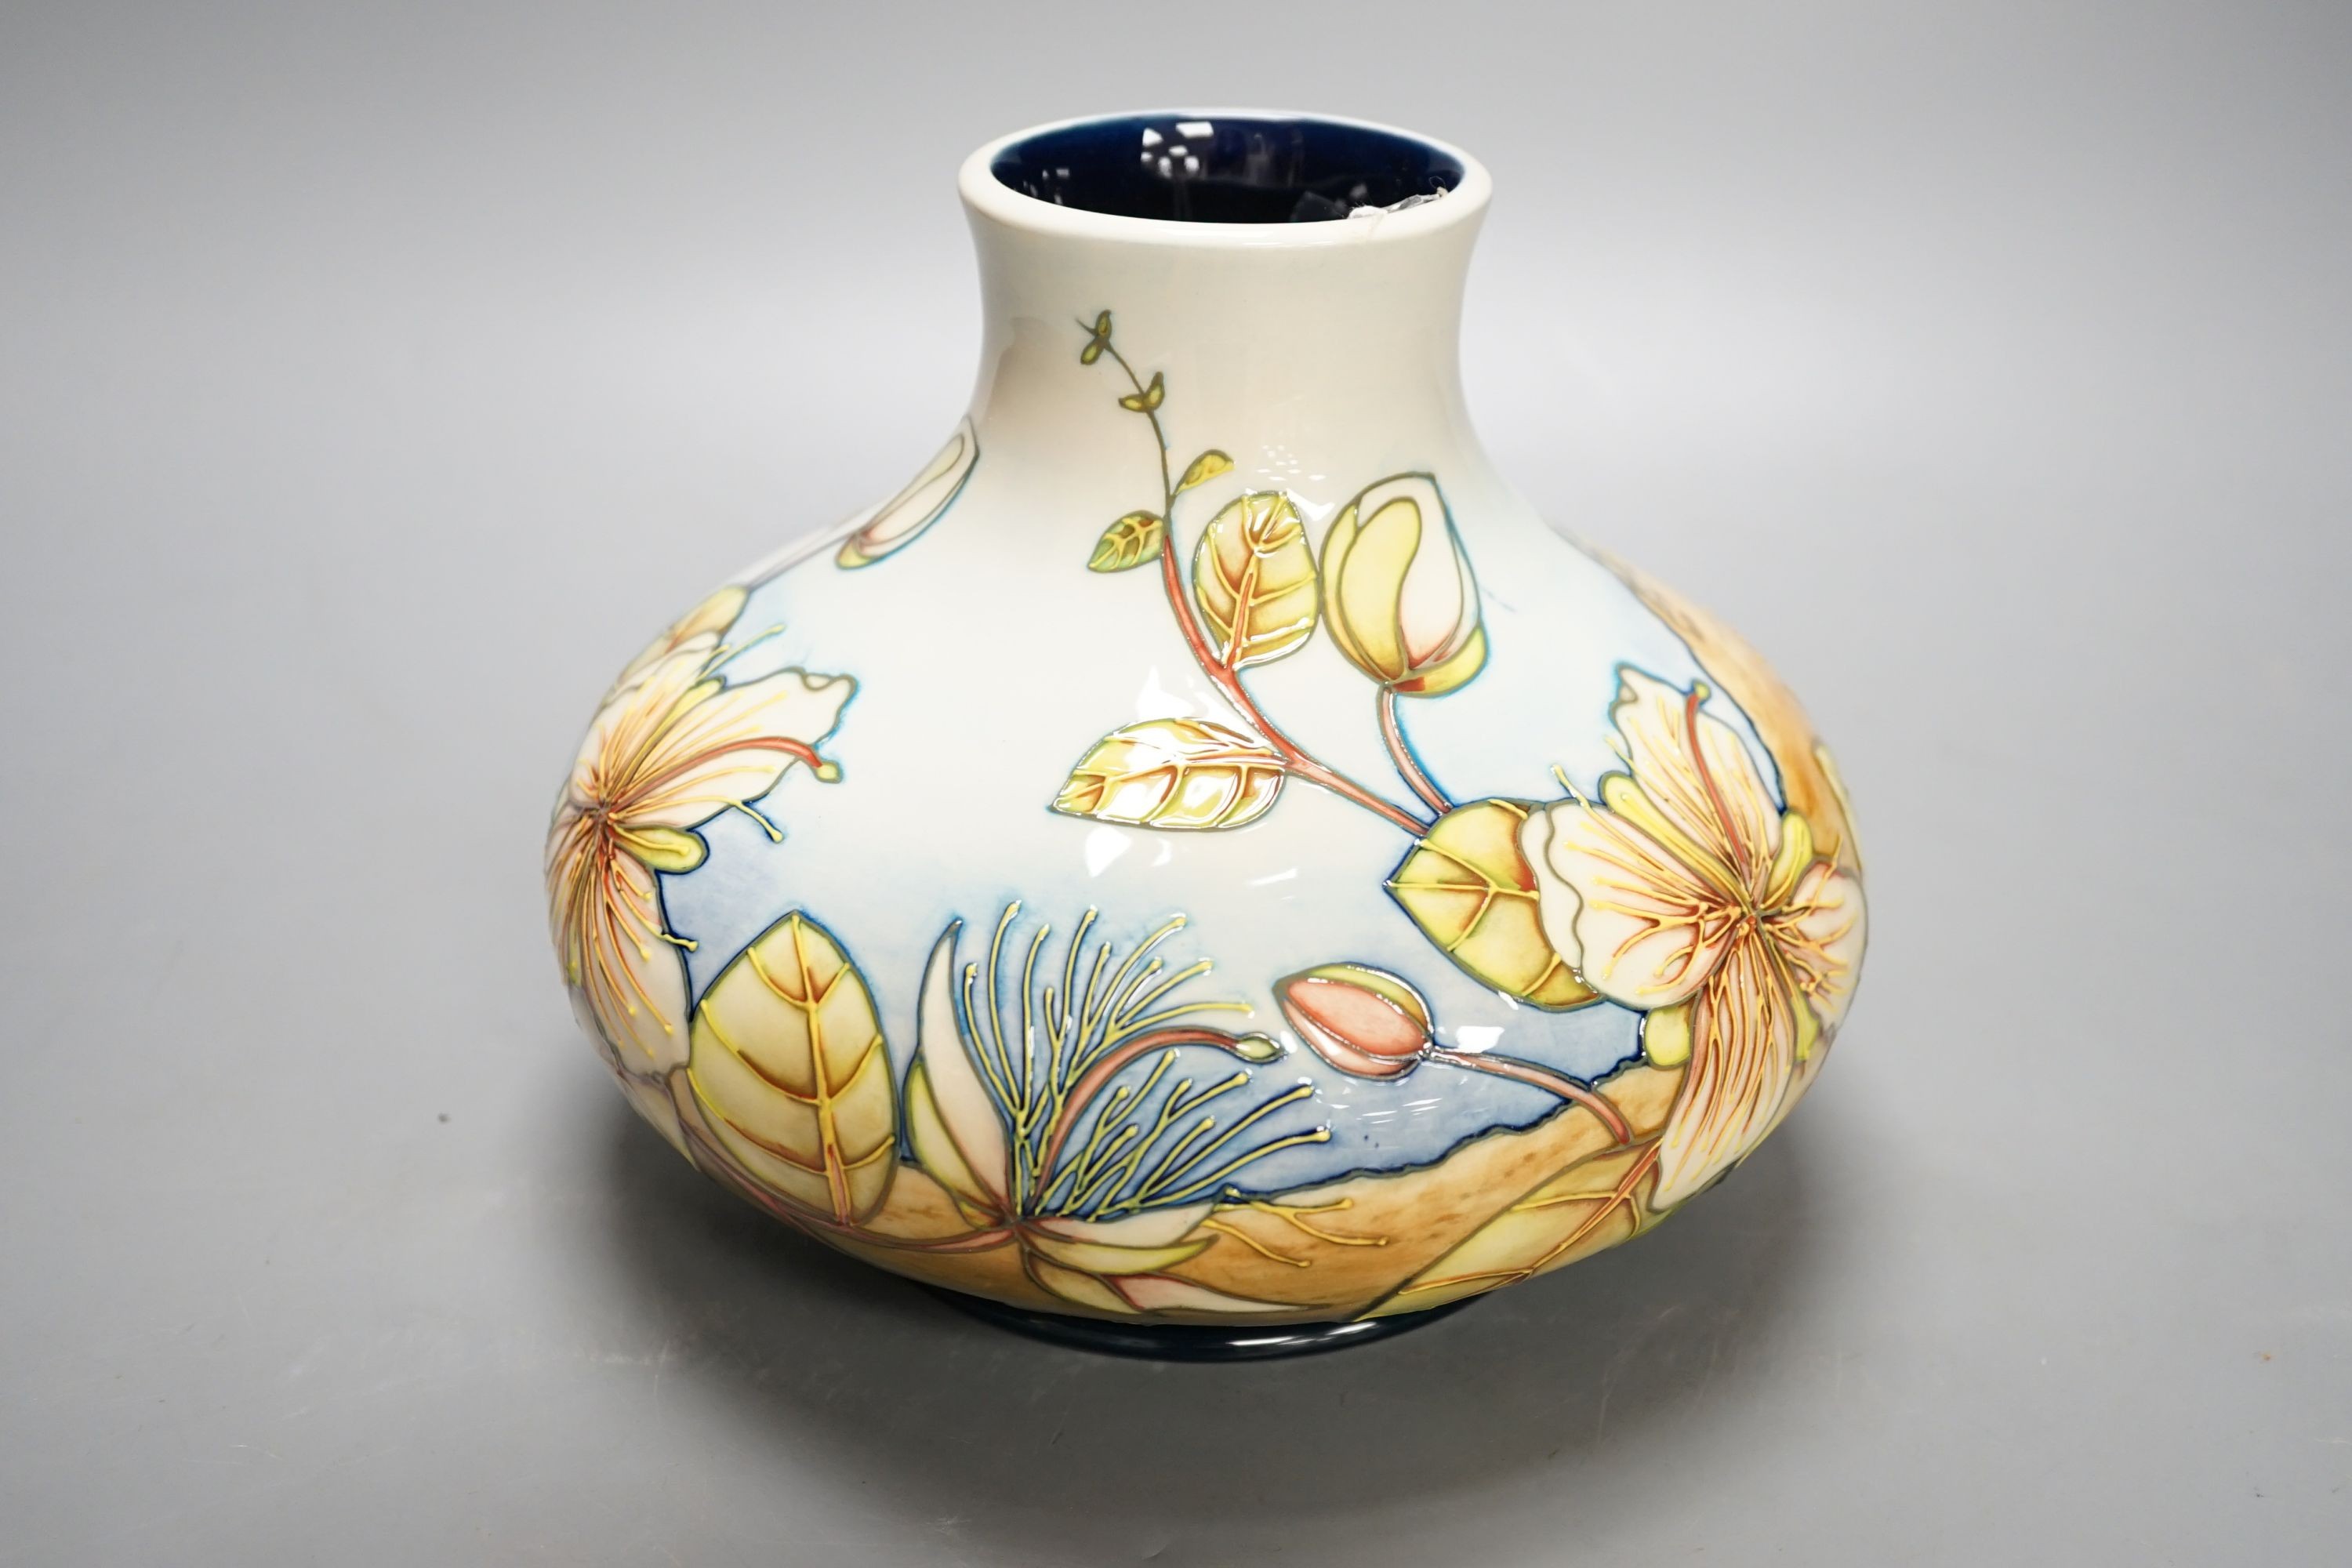 A Moorcroft Capers pattern squat baluster vase, dated 2000, signed Anji Davenport, Limited edition 66/100